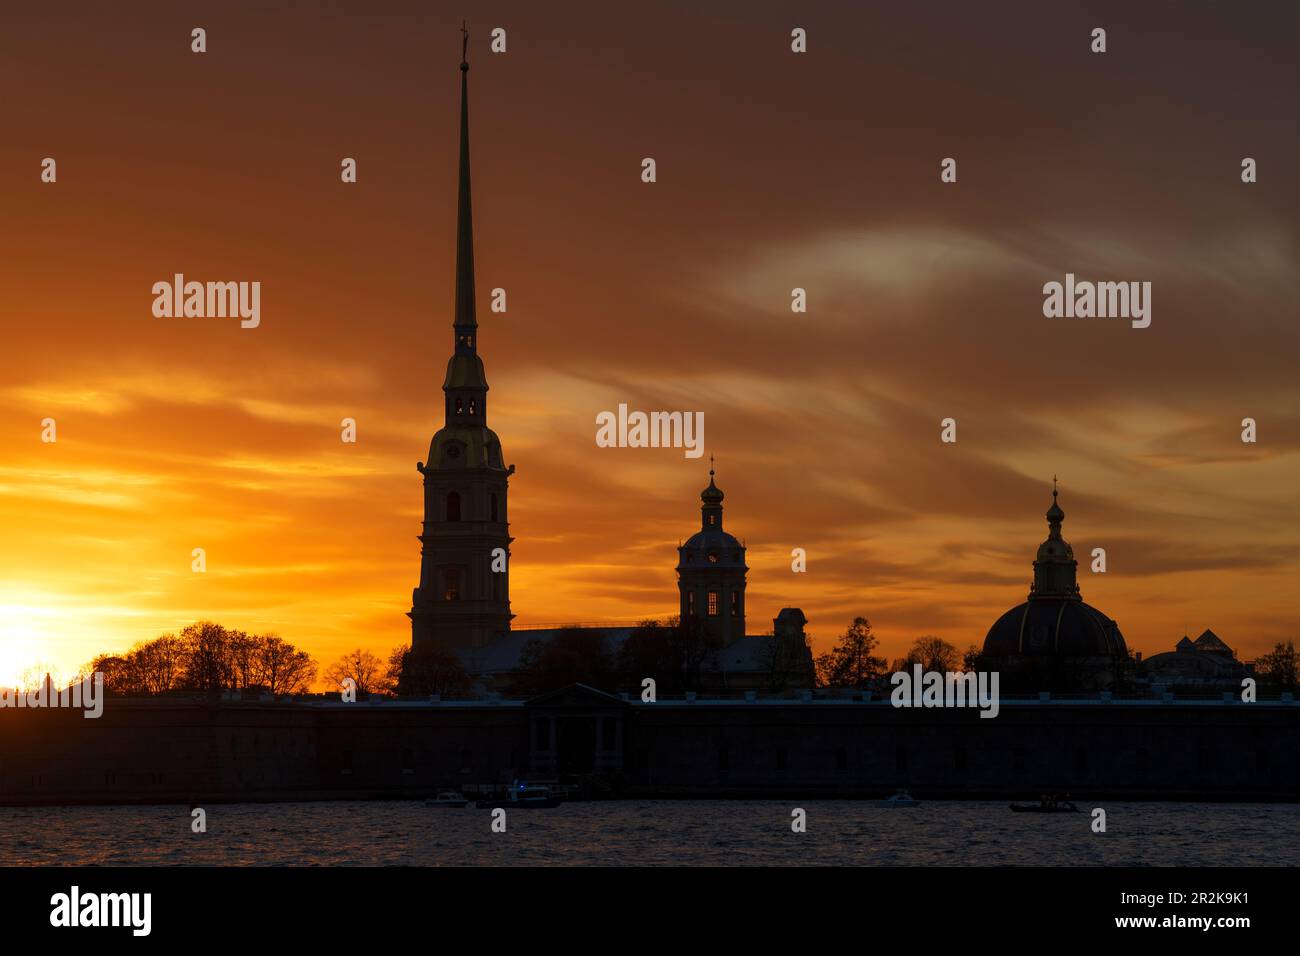 Peter and Paul Cathedral in the Peter and Paul Fortress against the background of a cloudy orange sunset. Saint Petersburg, Russia Stock Photo